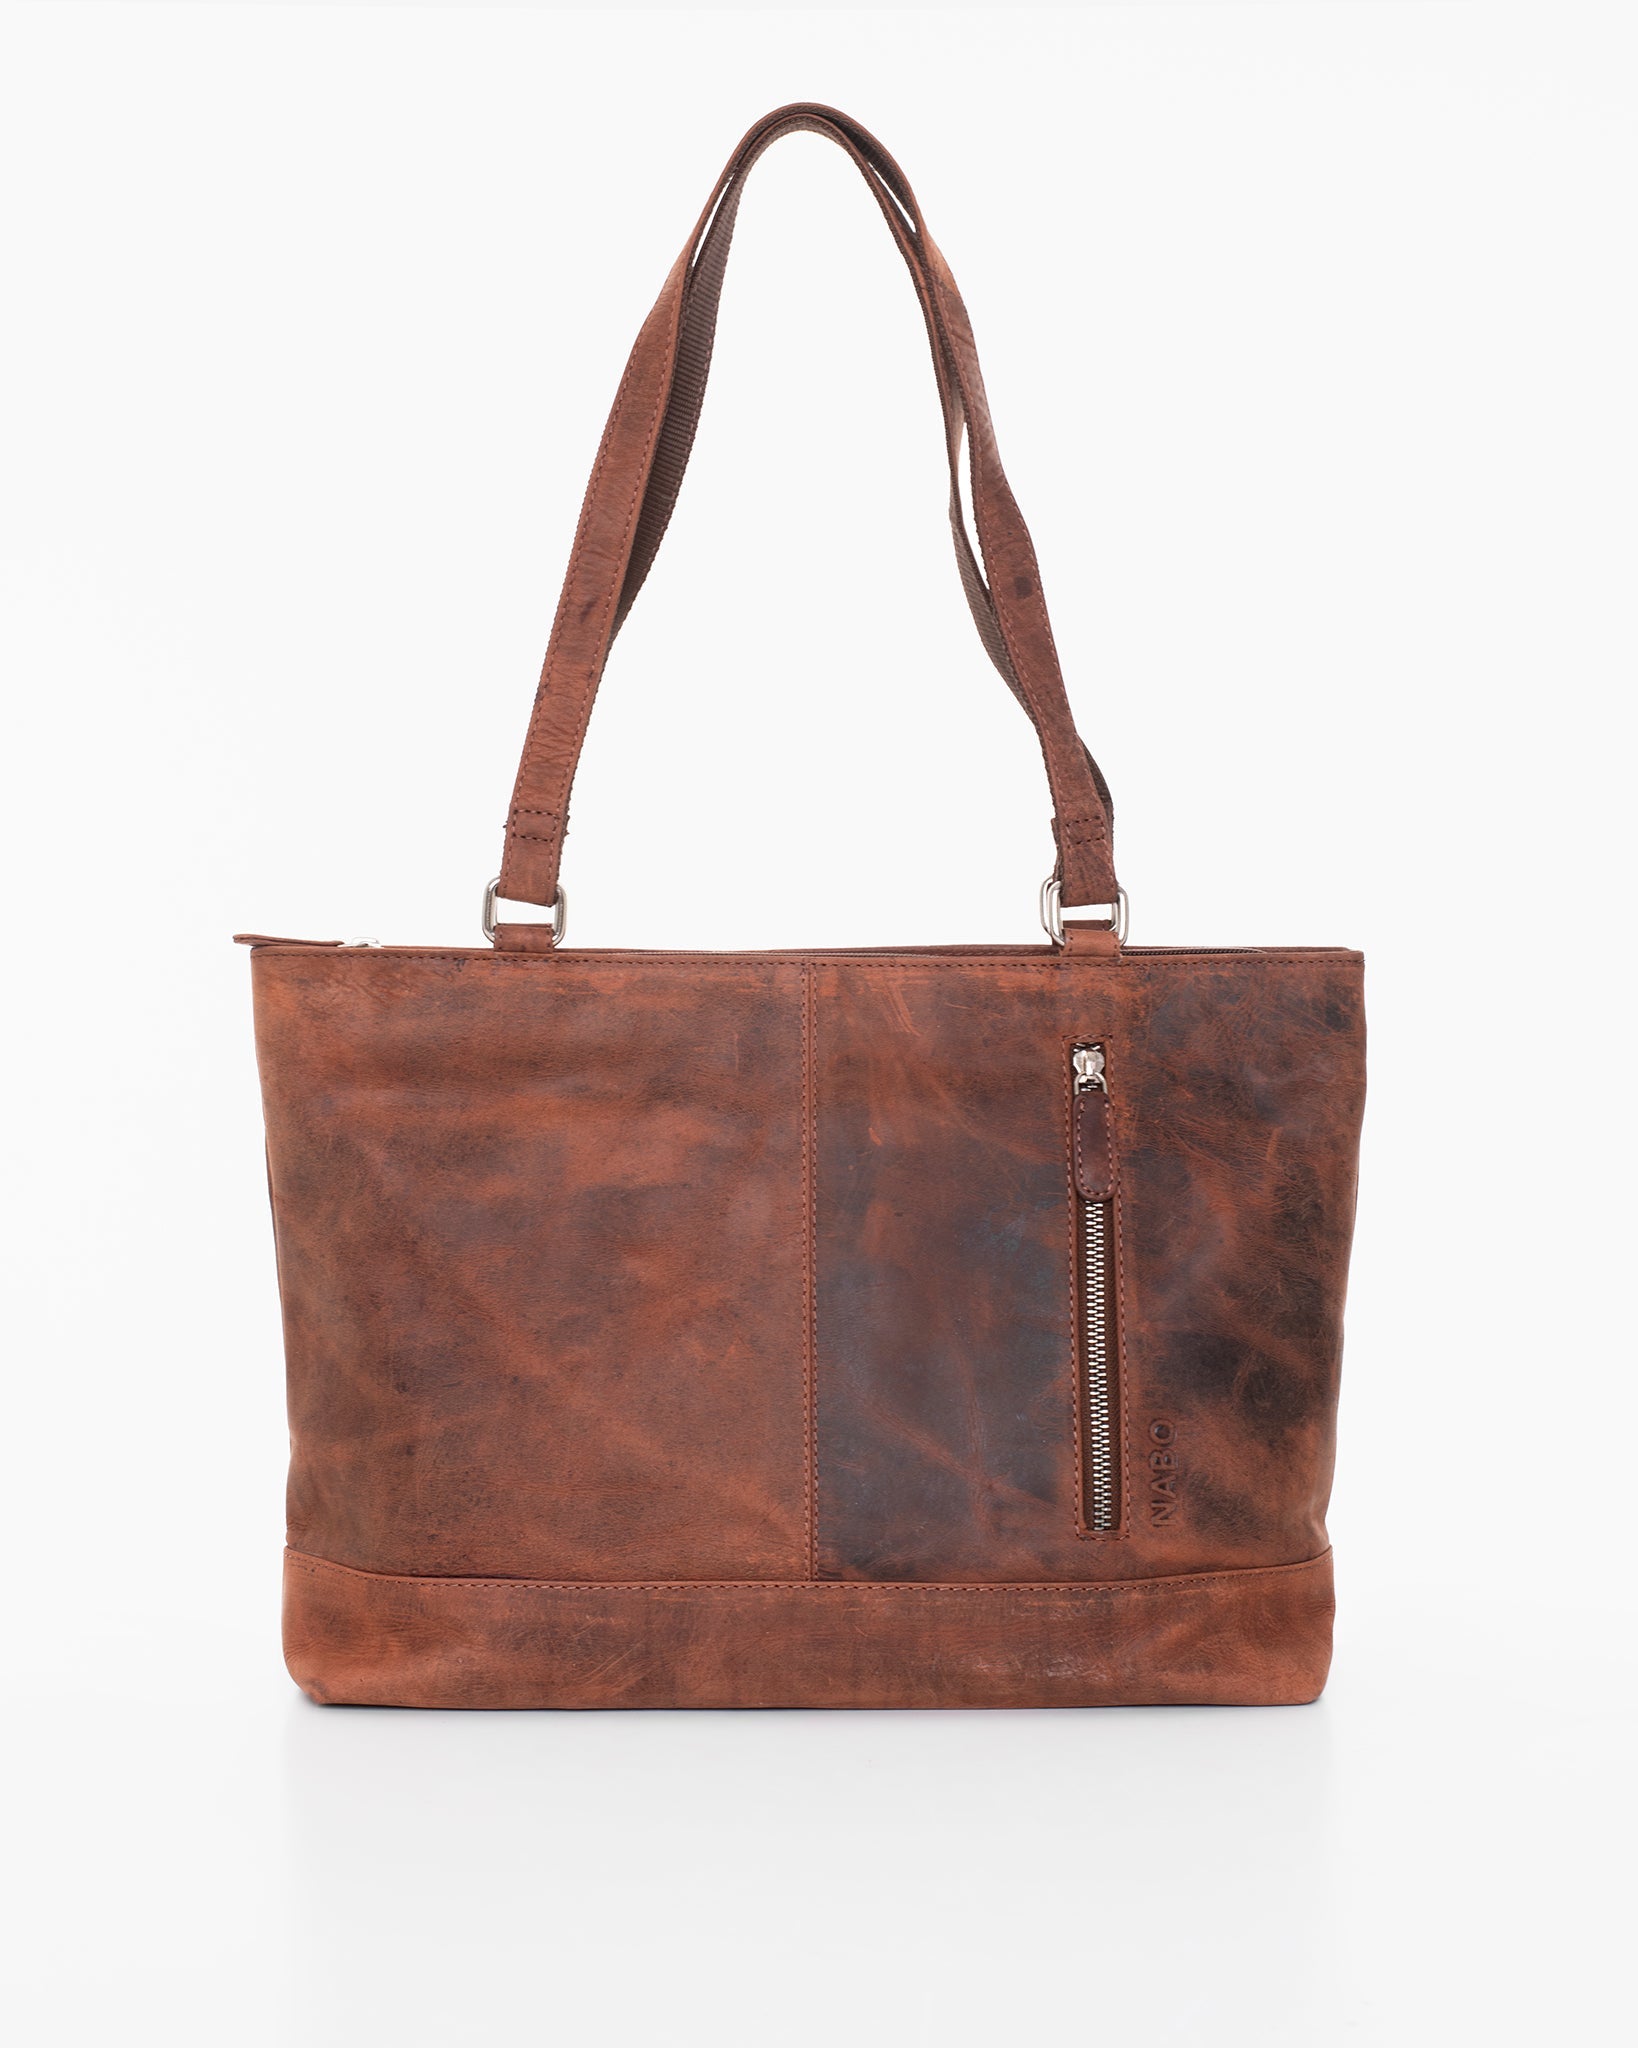 A Finnish-designed Leather Shoulder Bag in brown leather, featuring multiple zippered compartments and a sleek, versatile style by Nabo. Dimensions: 40 x 26 x 11 cm.